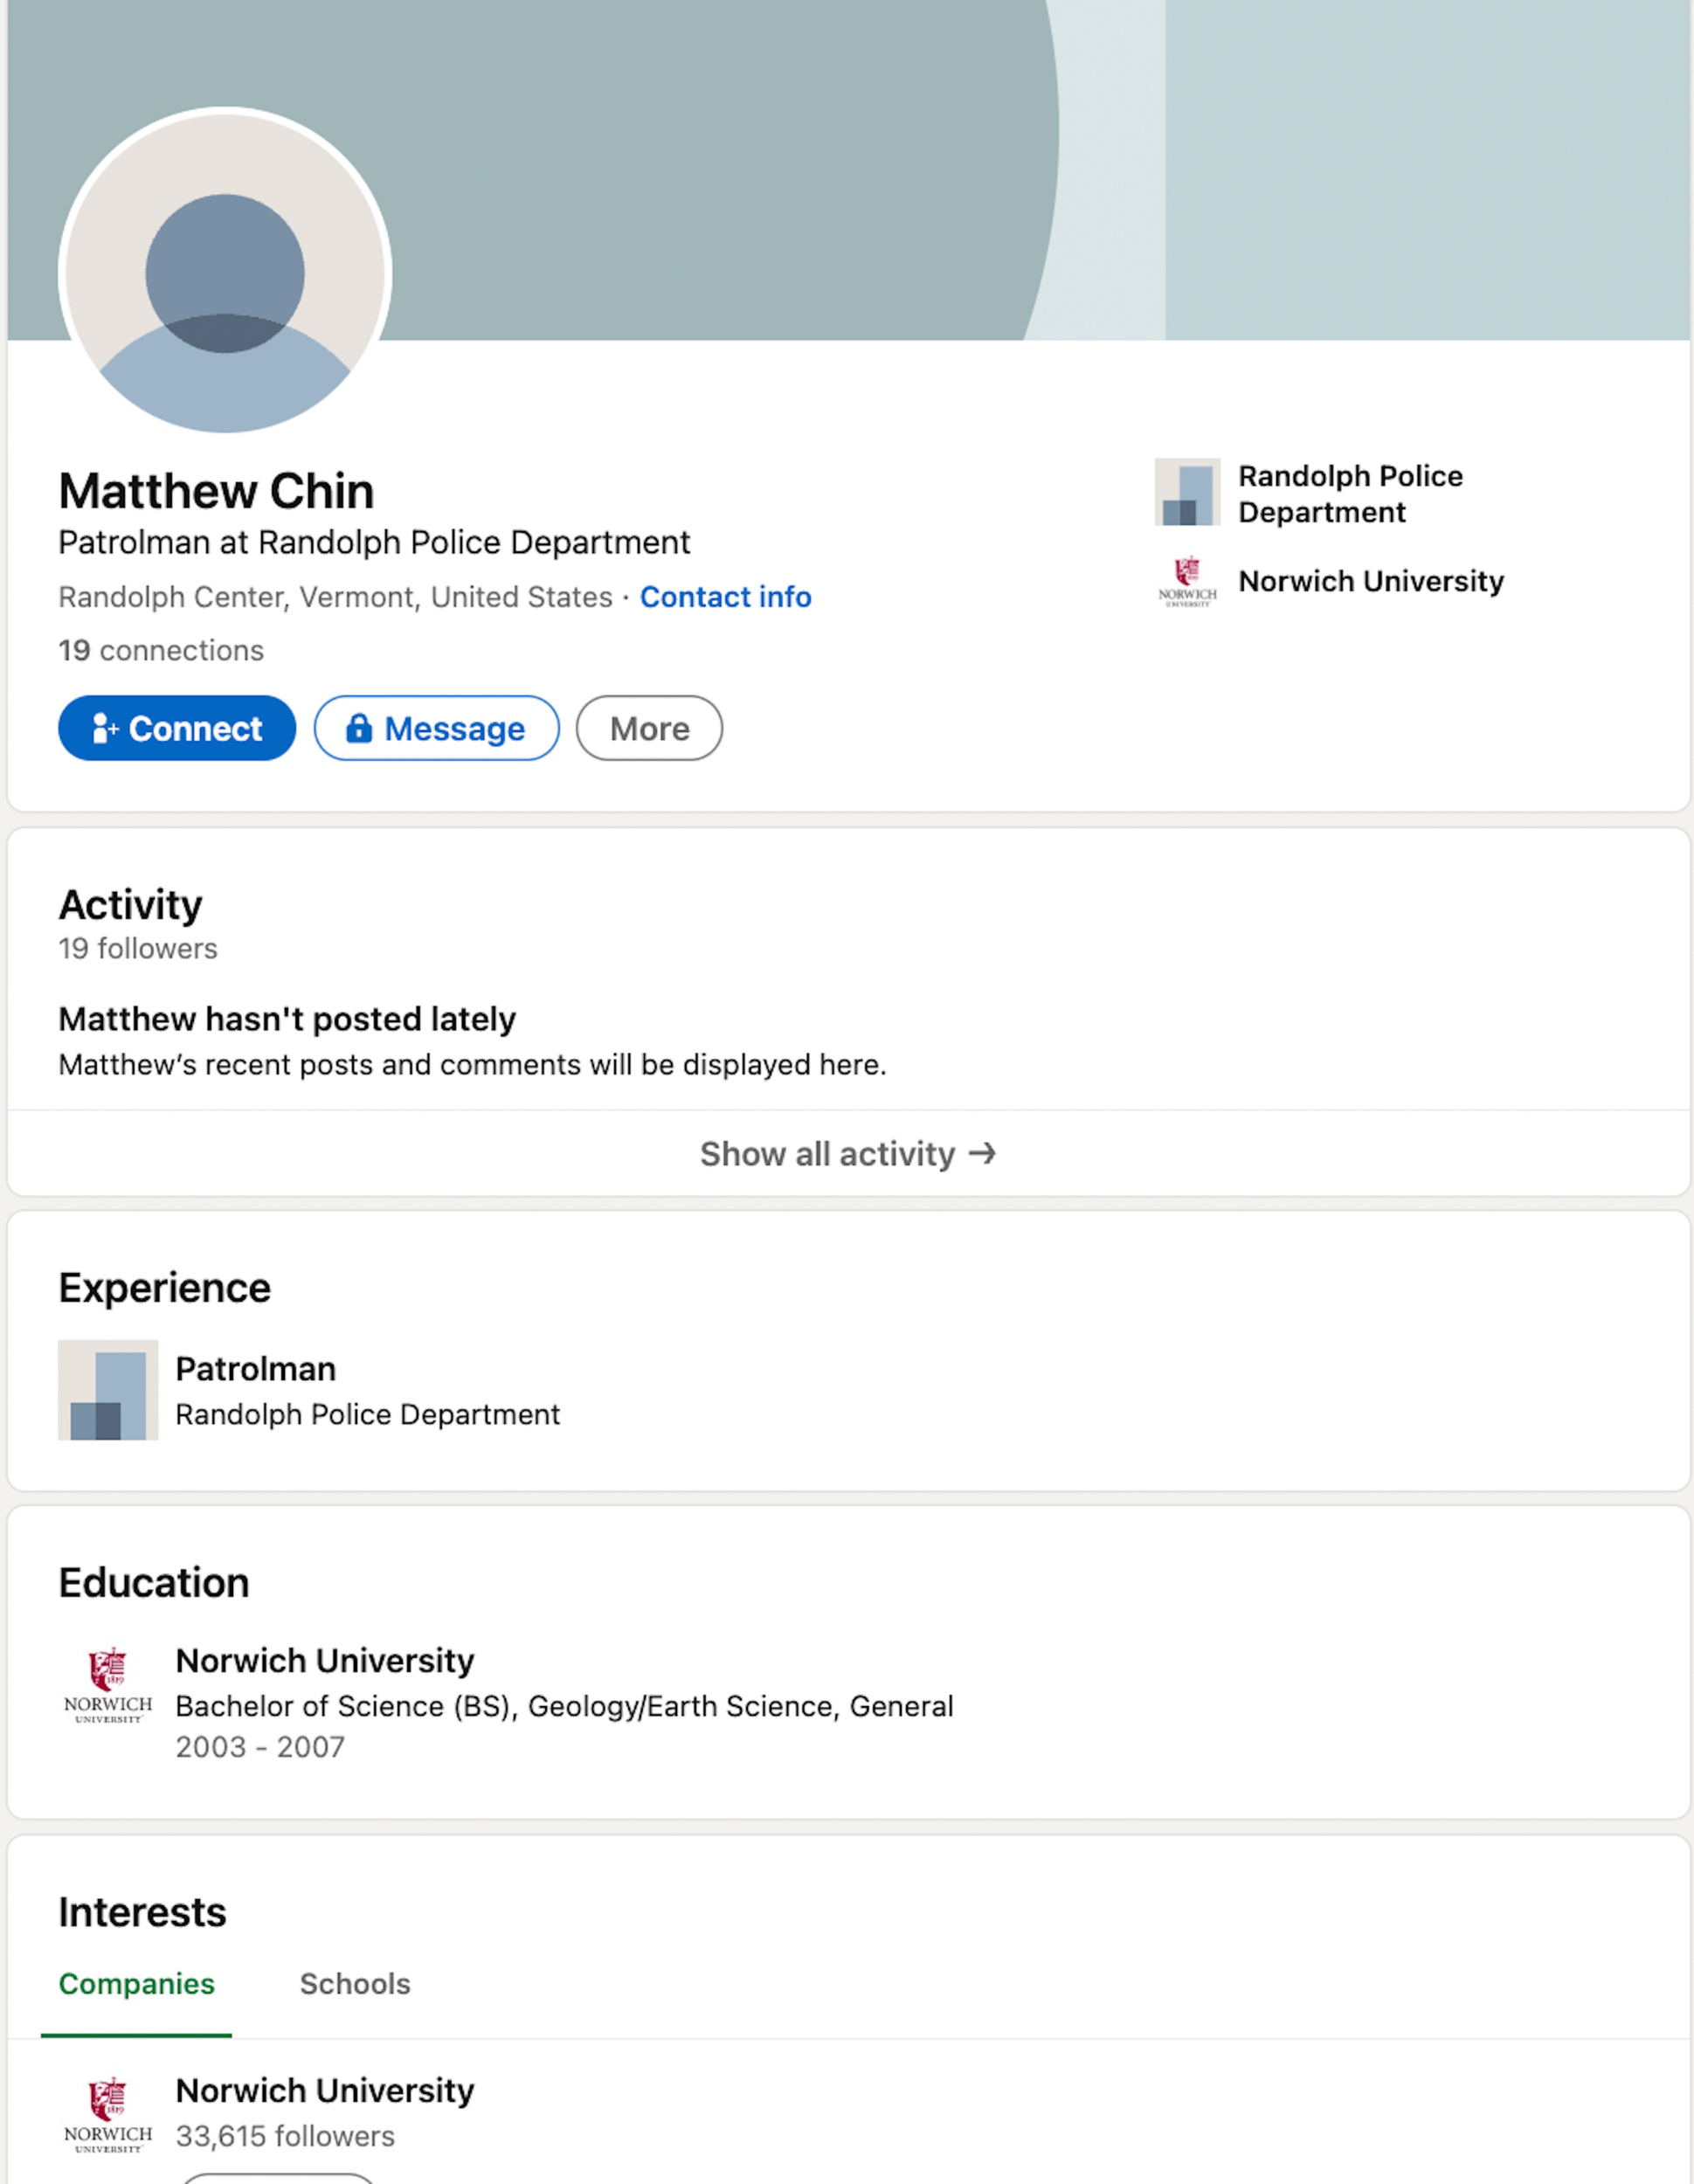 Matthew Chin's linked in page saying that he is a "patrolman at Randolph Olice Department," and also that he graduated from Norwich University in 2007 with a BS in Geology/Earth Science.